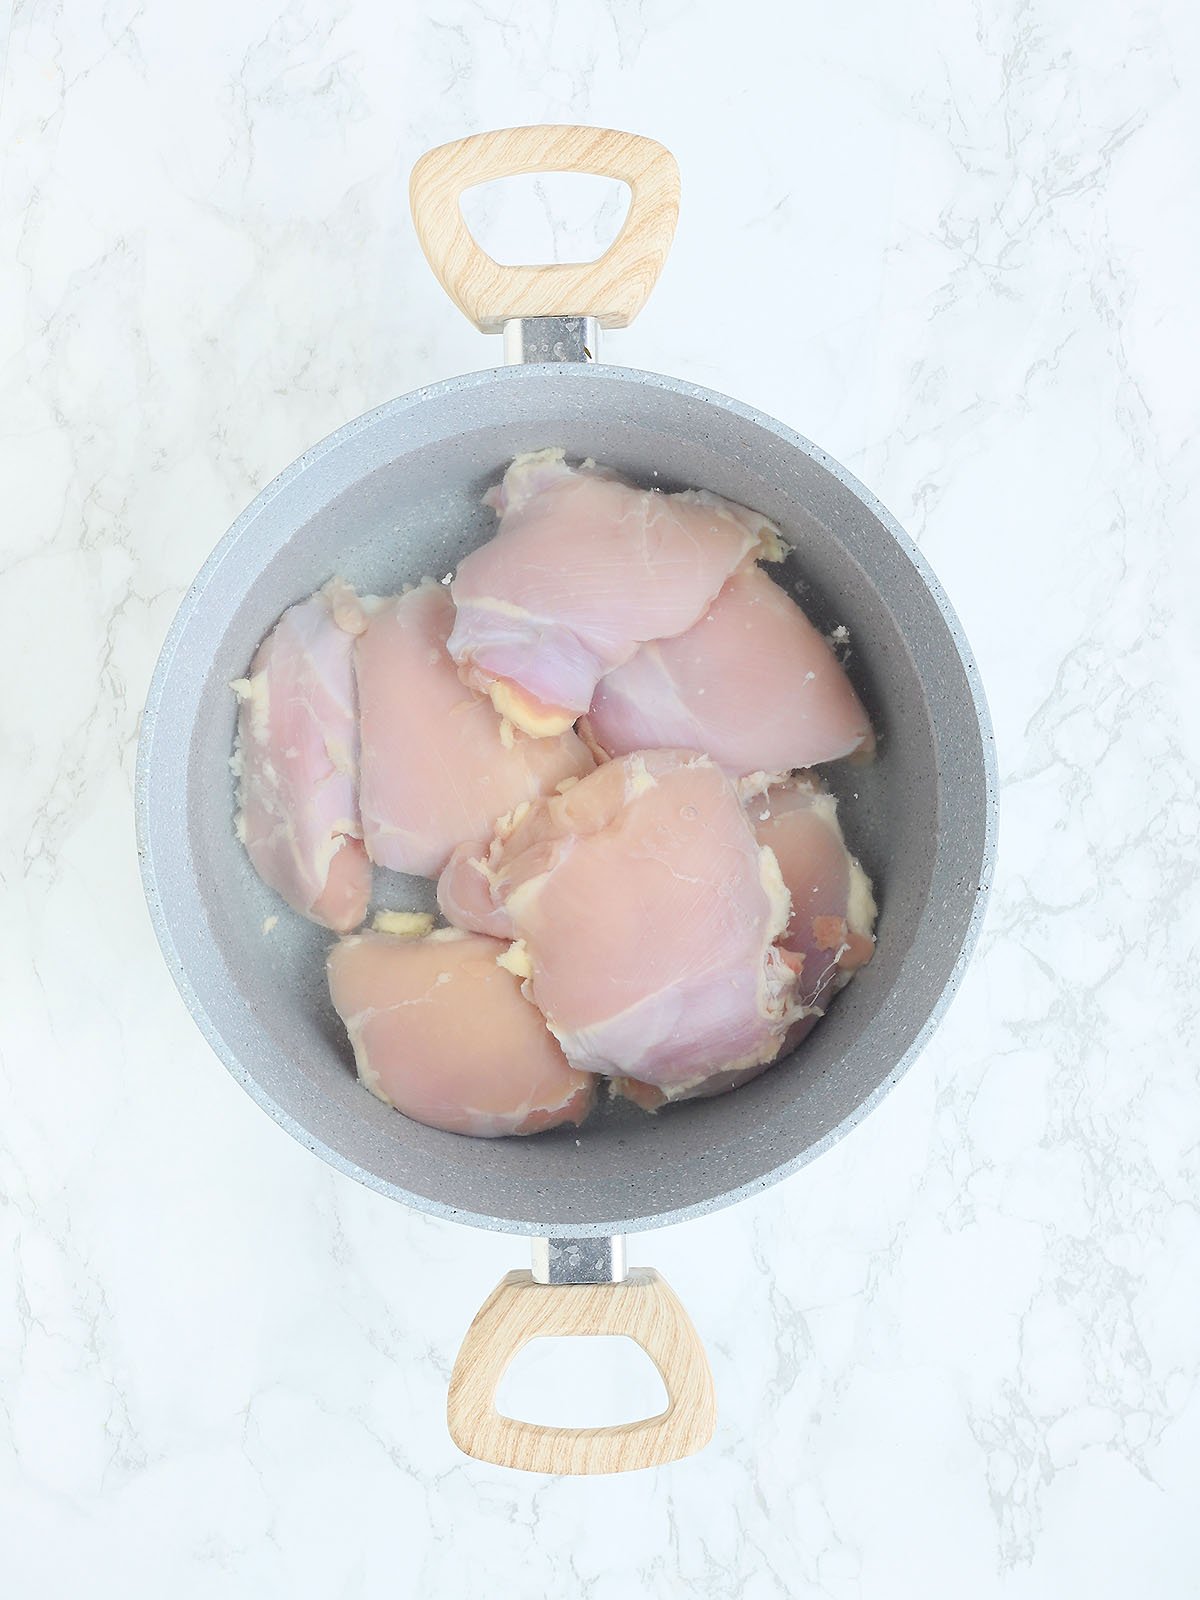 chicken breasts in water in a large pot